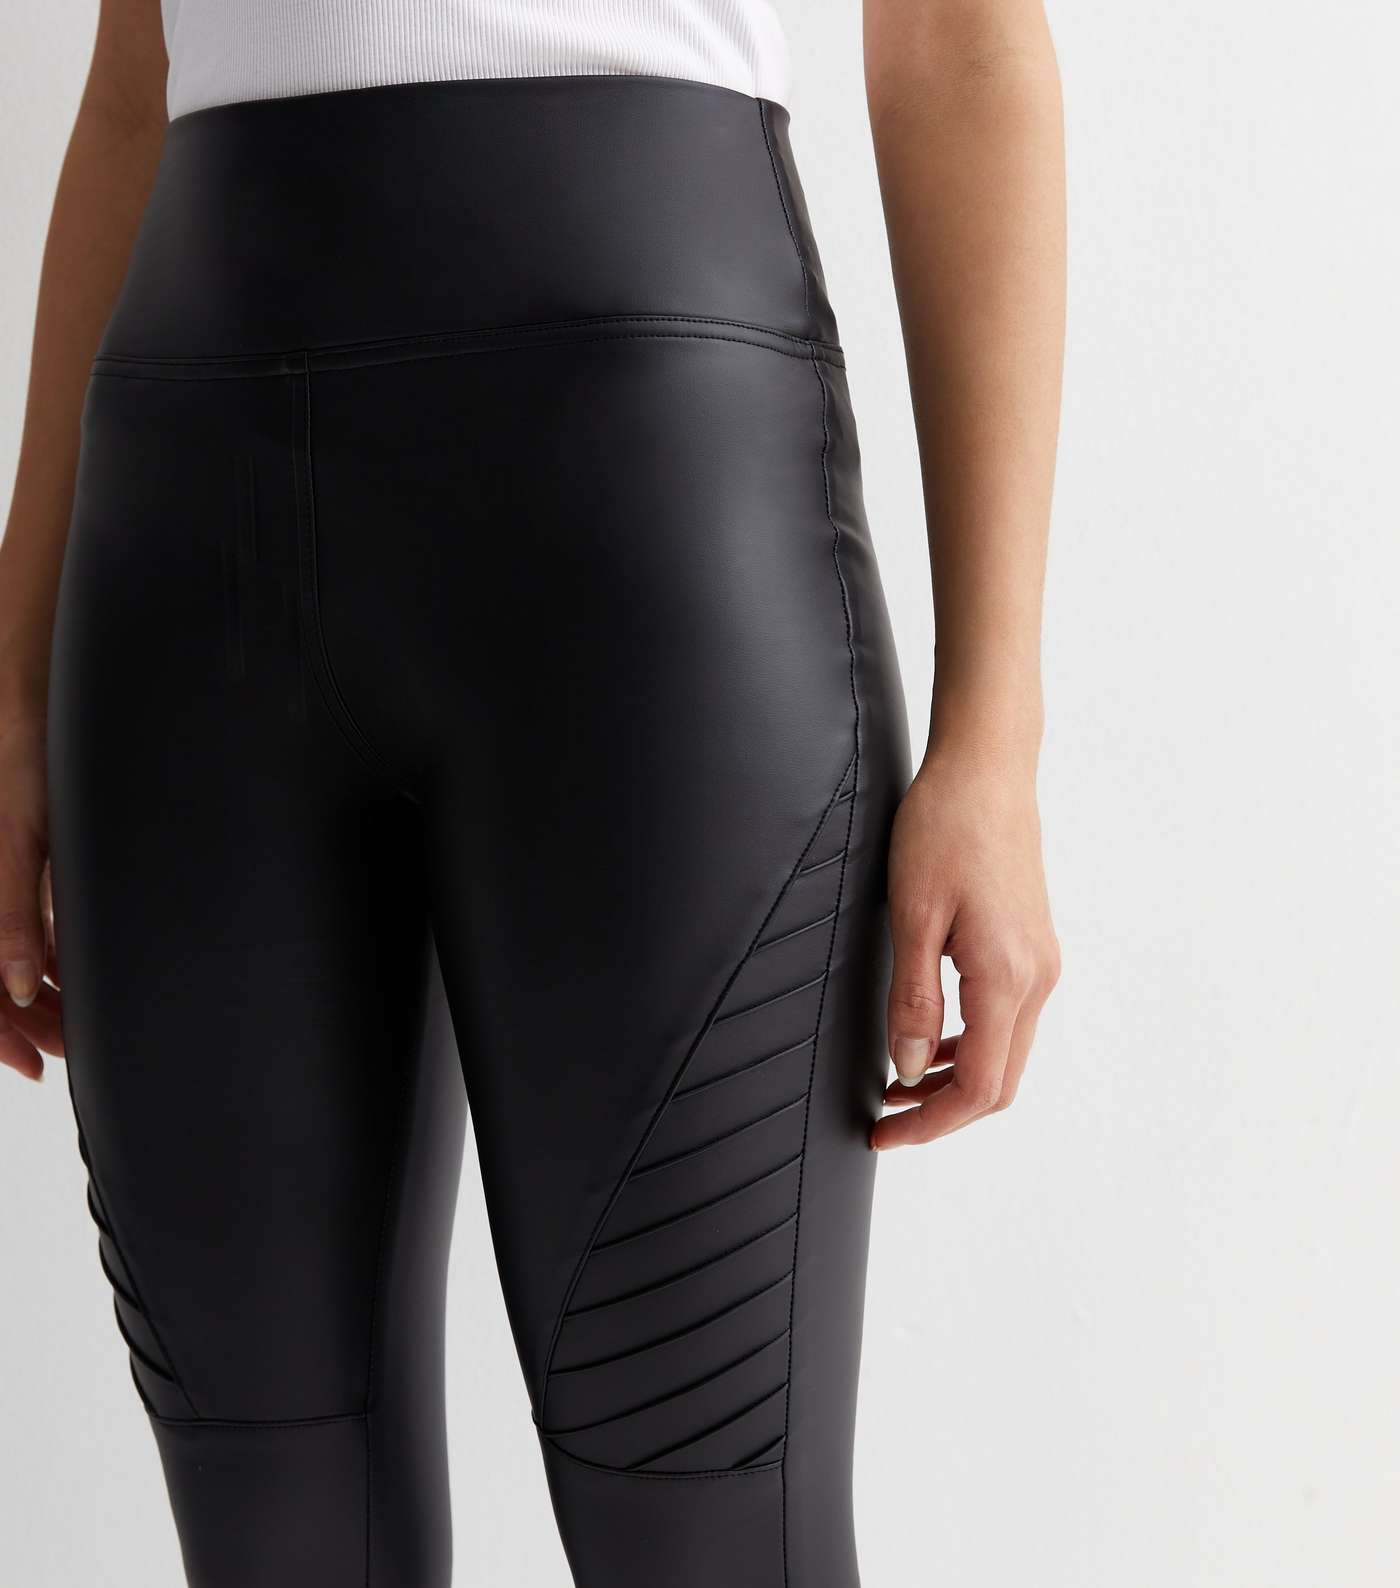 Cameo Rose Black Leather-Look Ribbed Panel Leggings Image 2